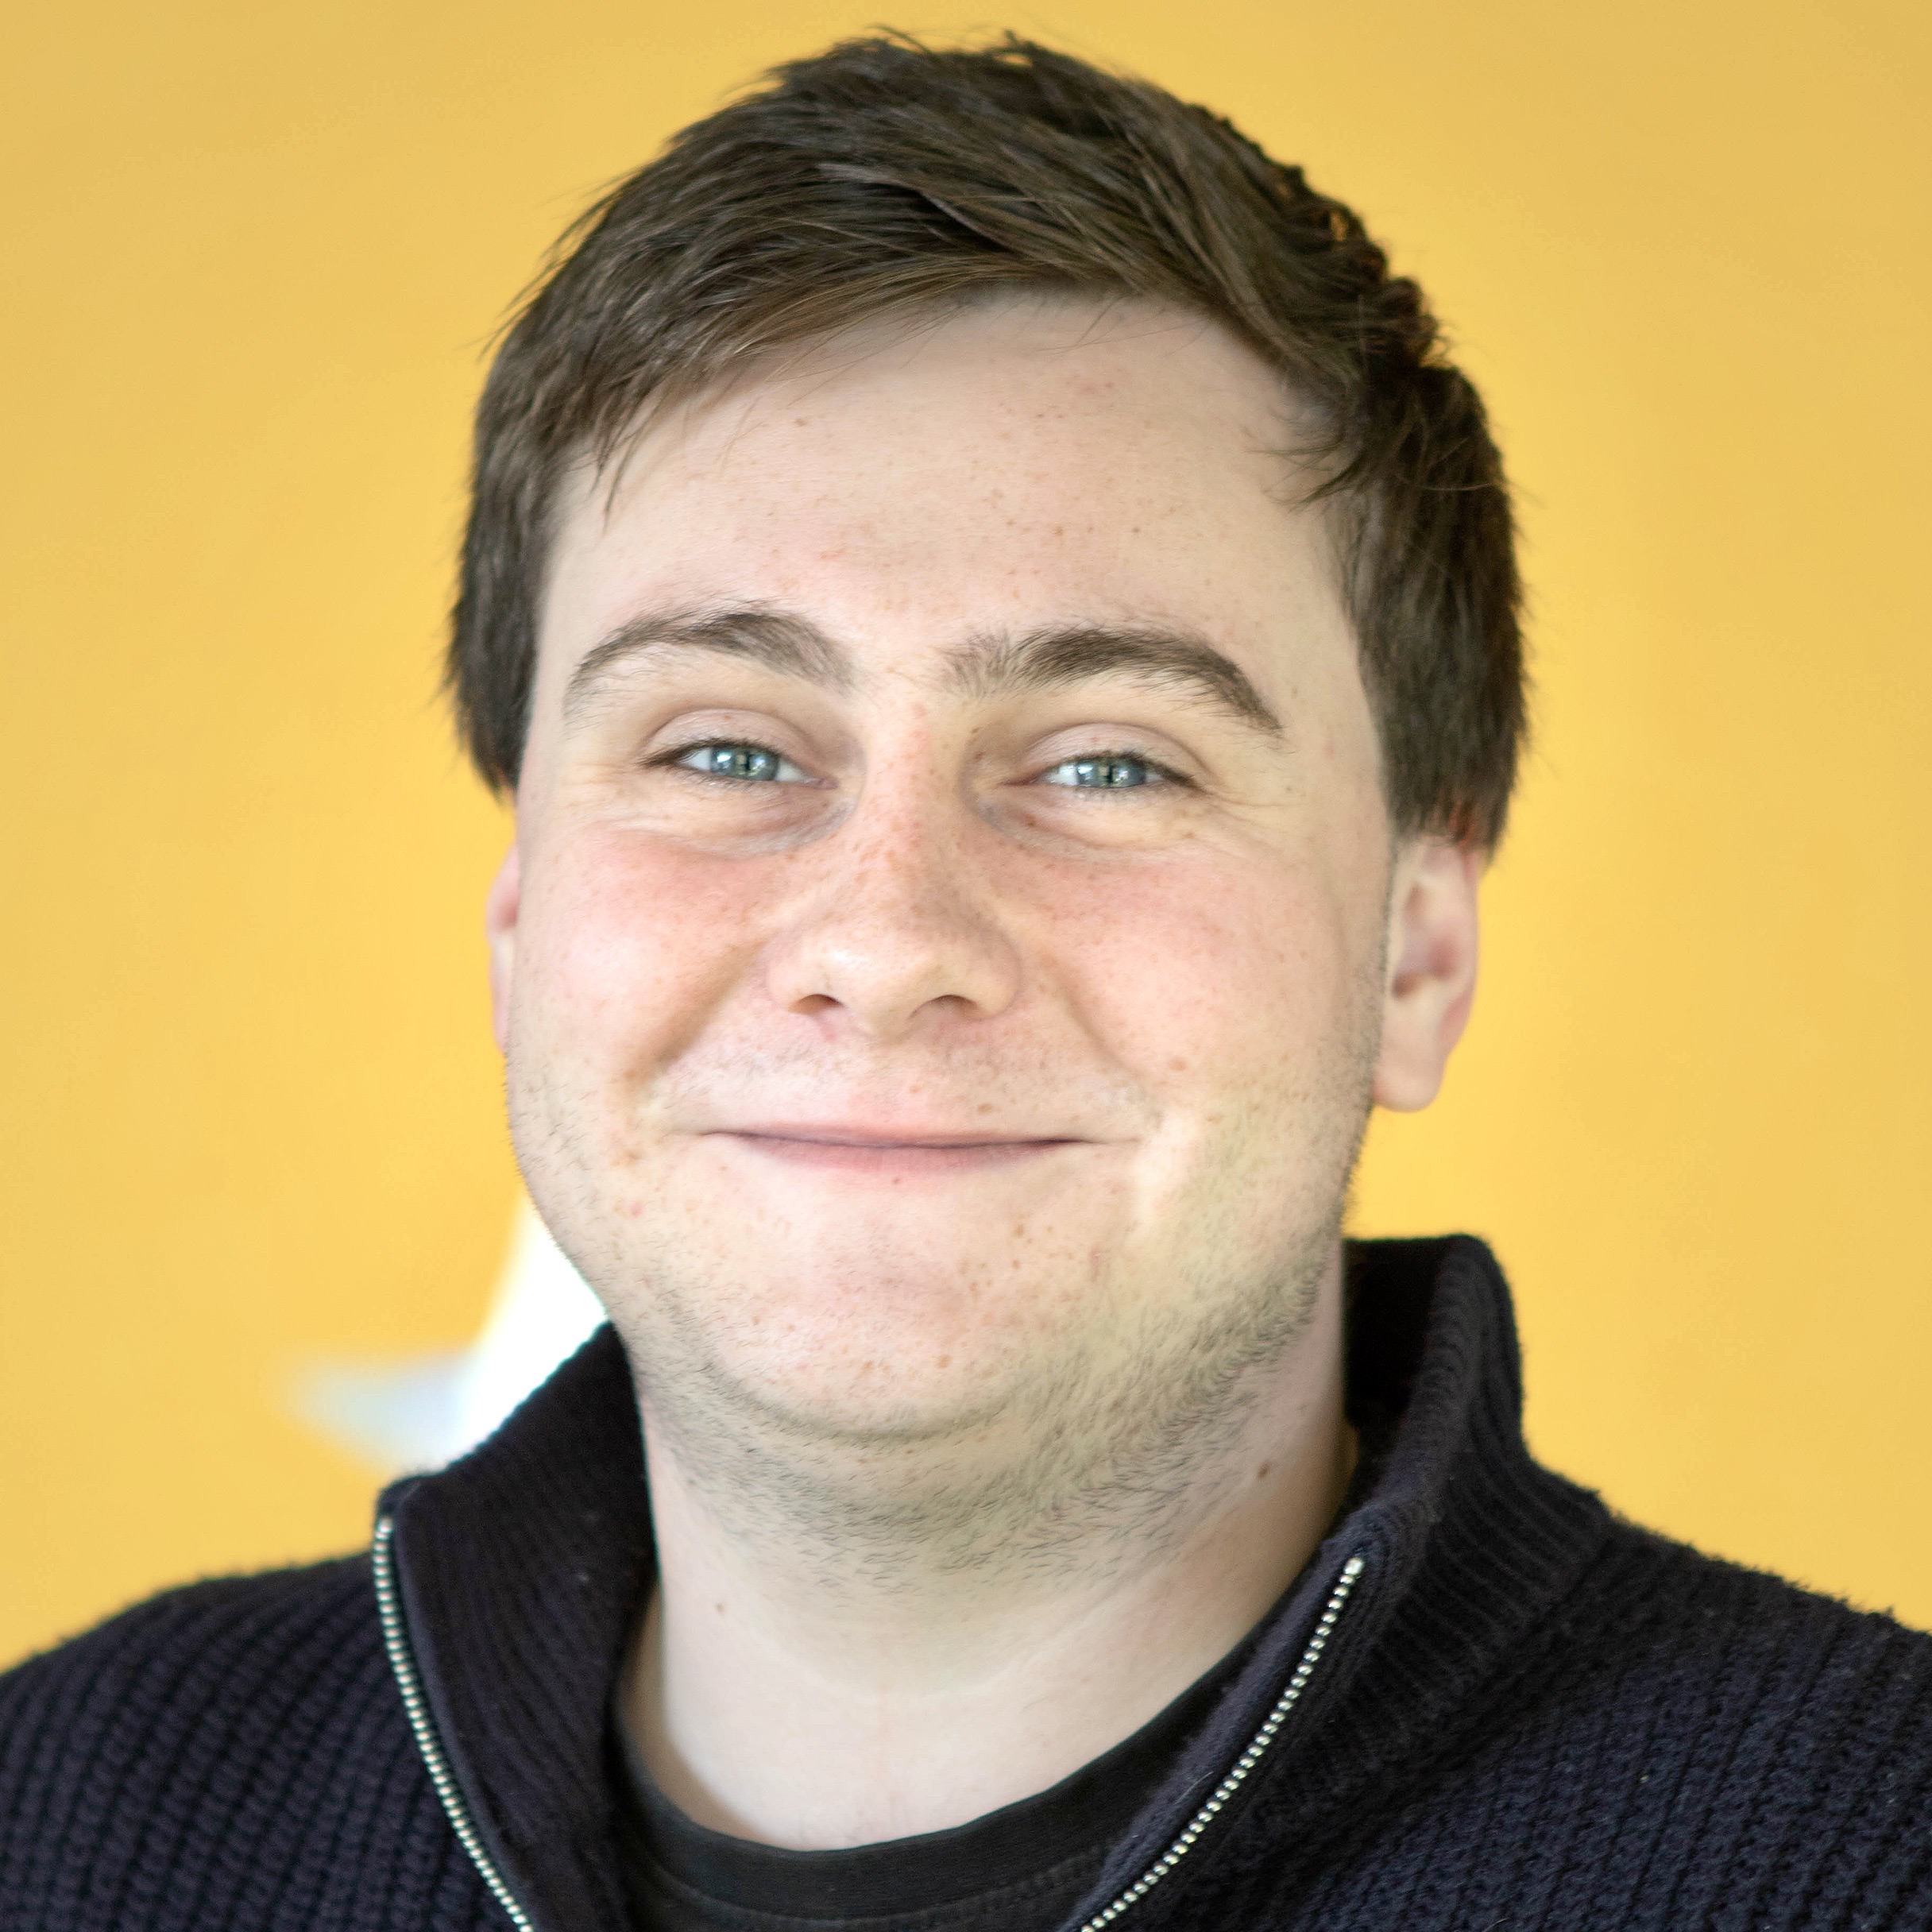 Oli Wilson, technology and workplace lead at Make-A-Wish Foundation UK